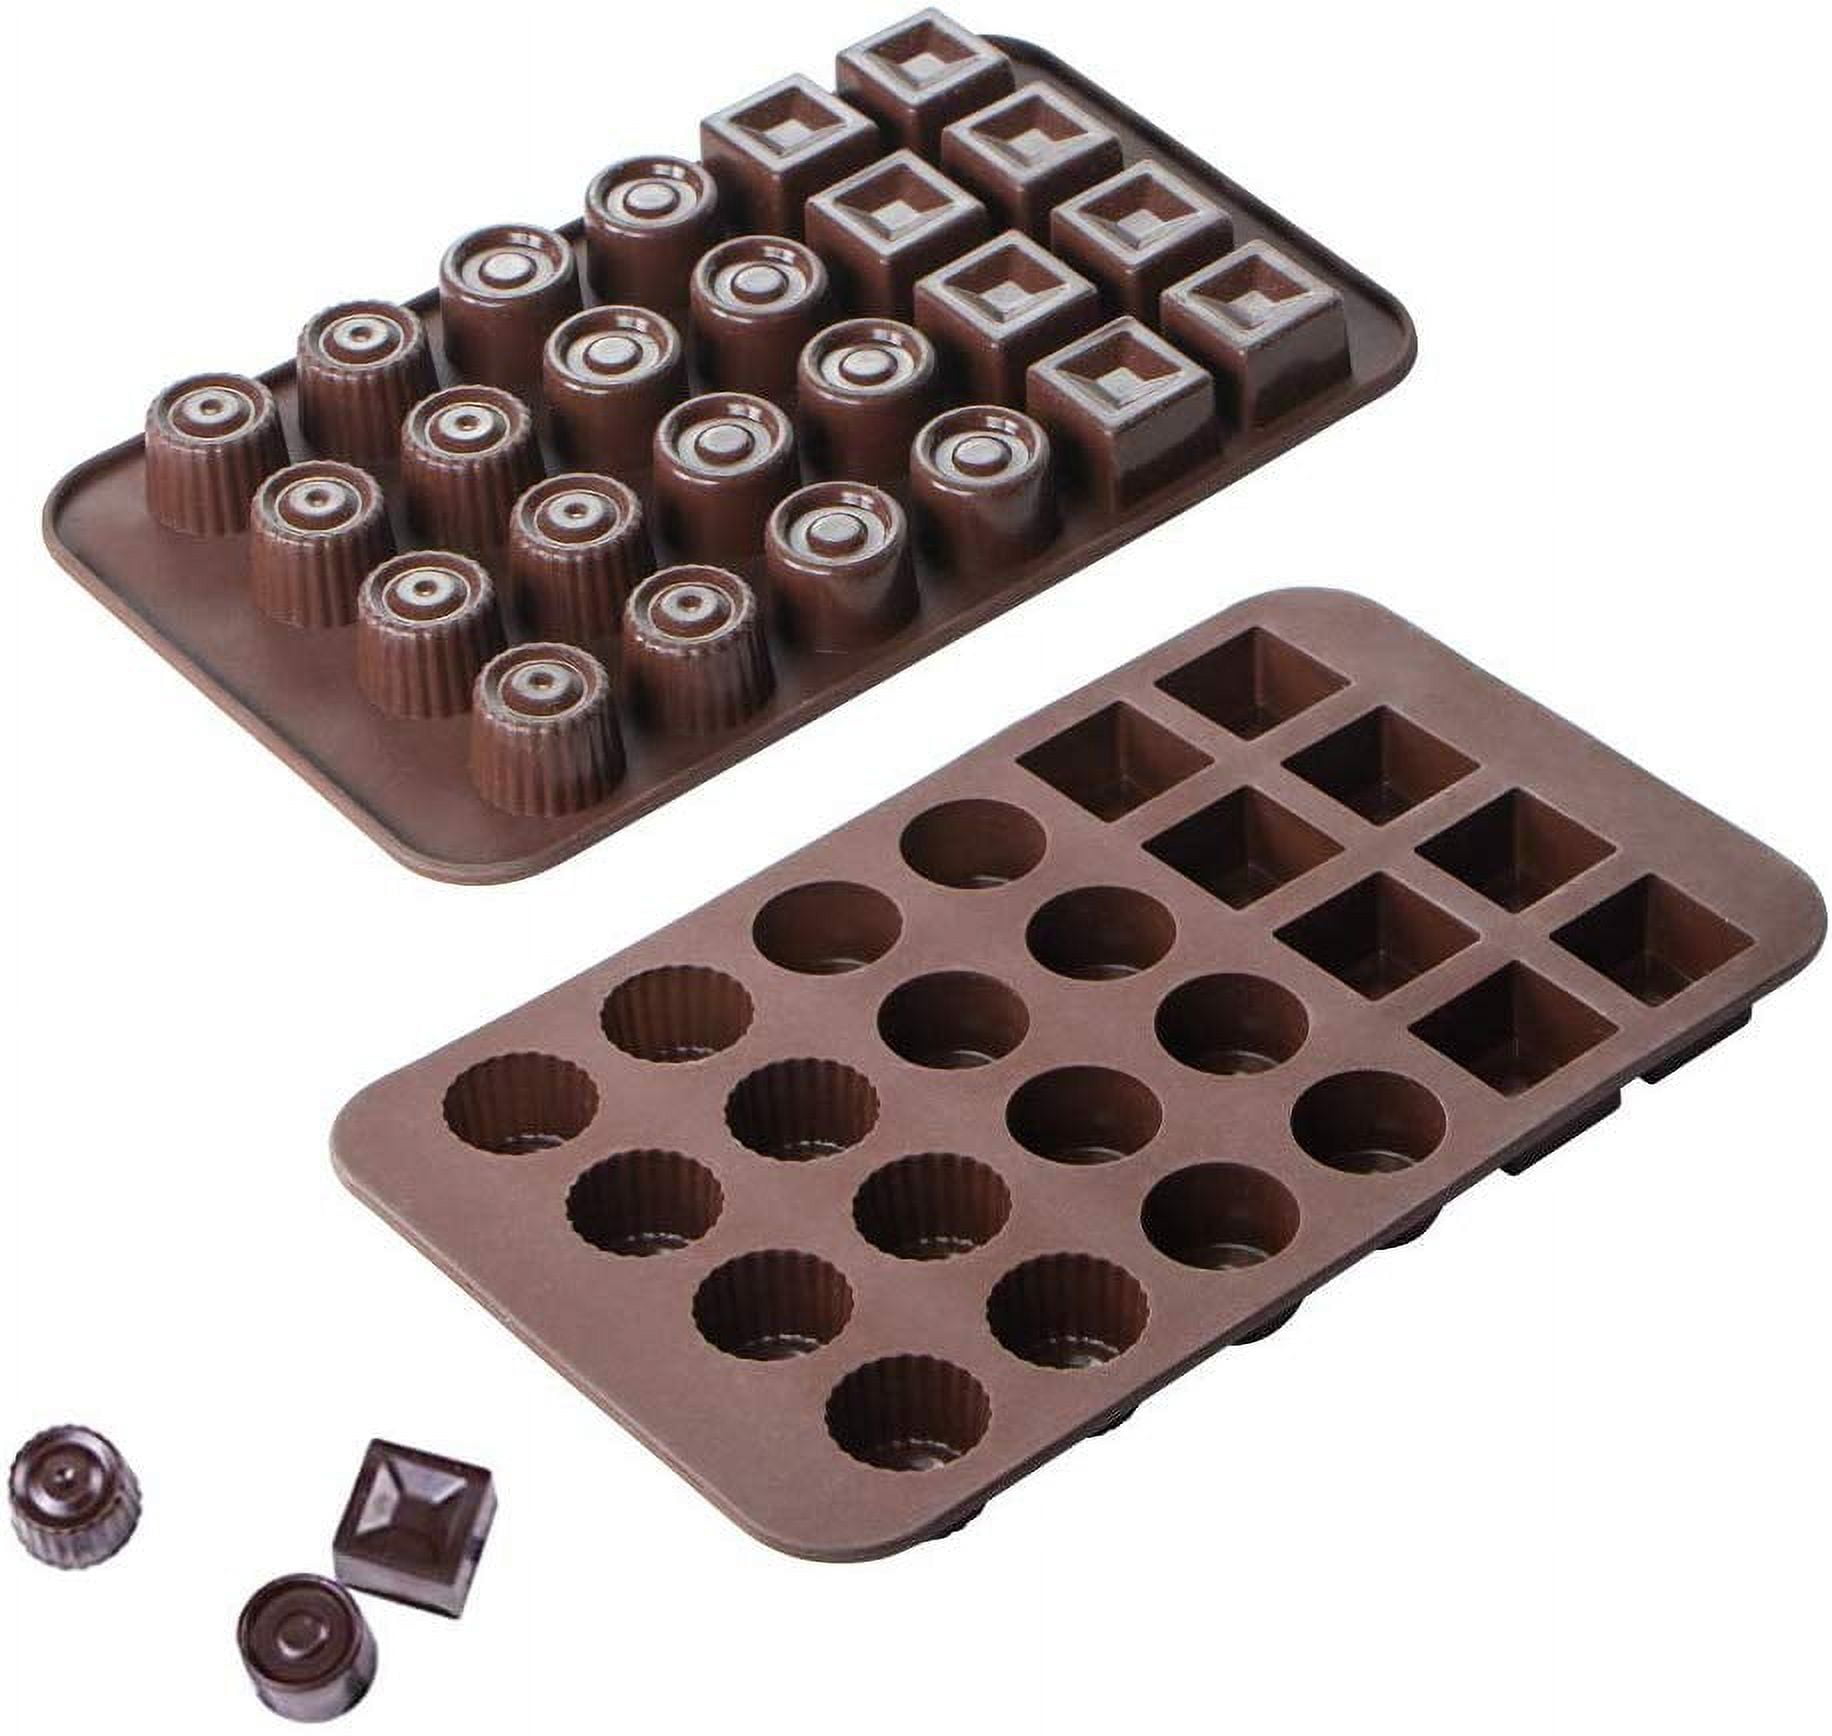 QDCFY Chocolate Molds (24 in 3 shapes),Chocolate Candy Silicone Mold 24-Pack with 3 Shapes, Baking Ice Cube Dropper Mold, Candy Silicone Mold, High and